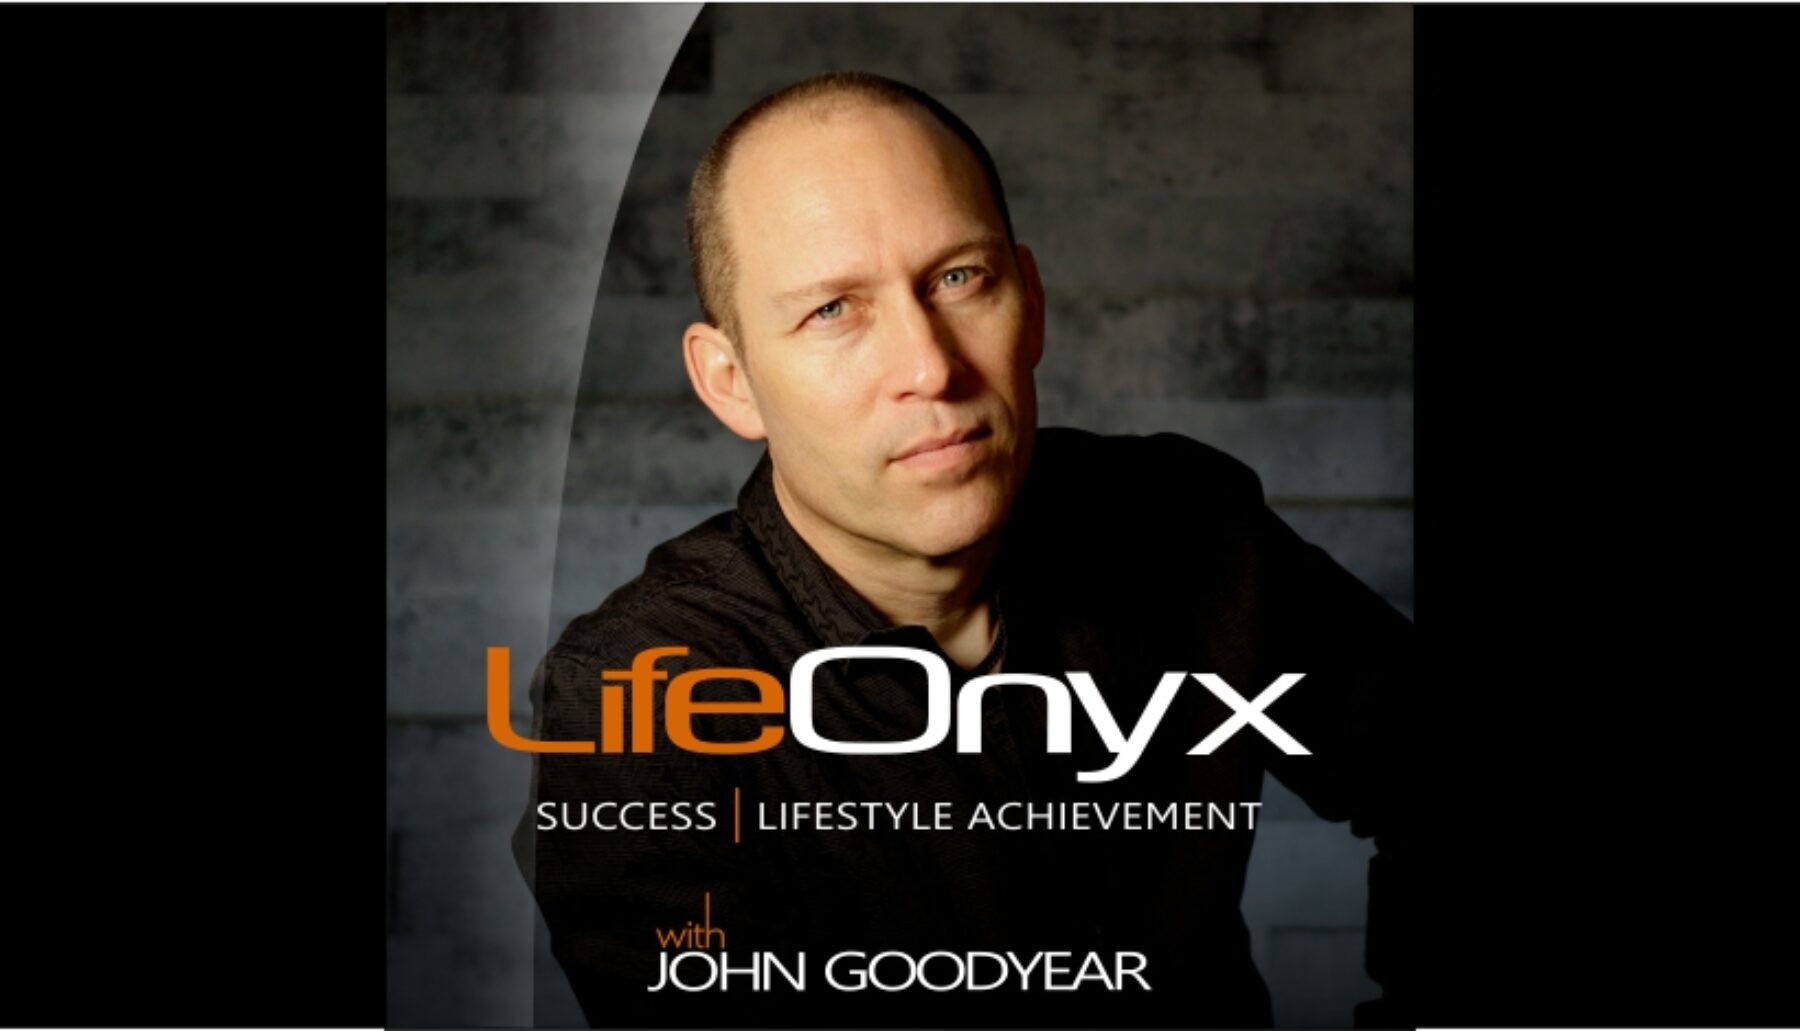 Introducing the LifeOnyx Podcast with John Goodyear